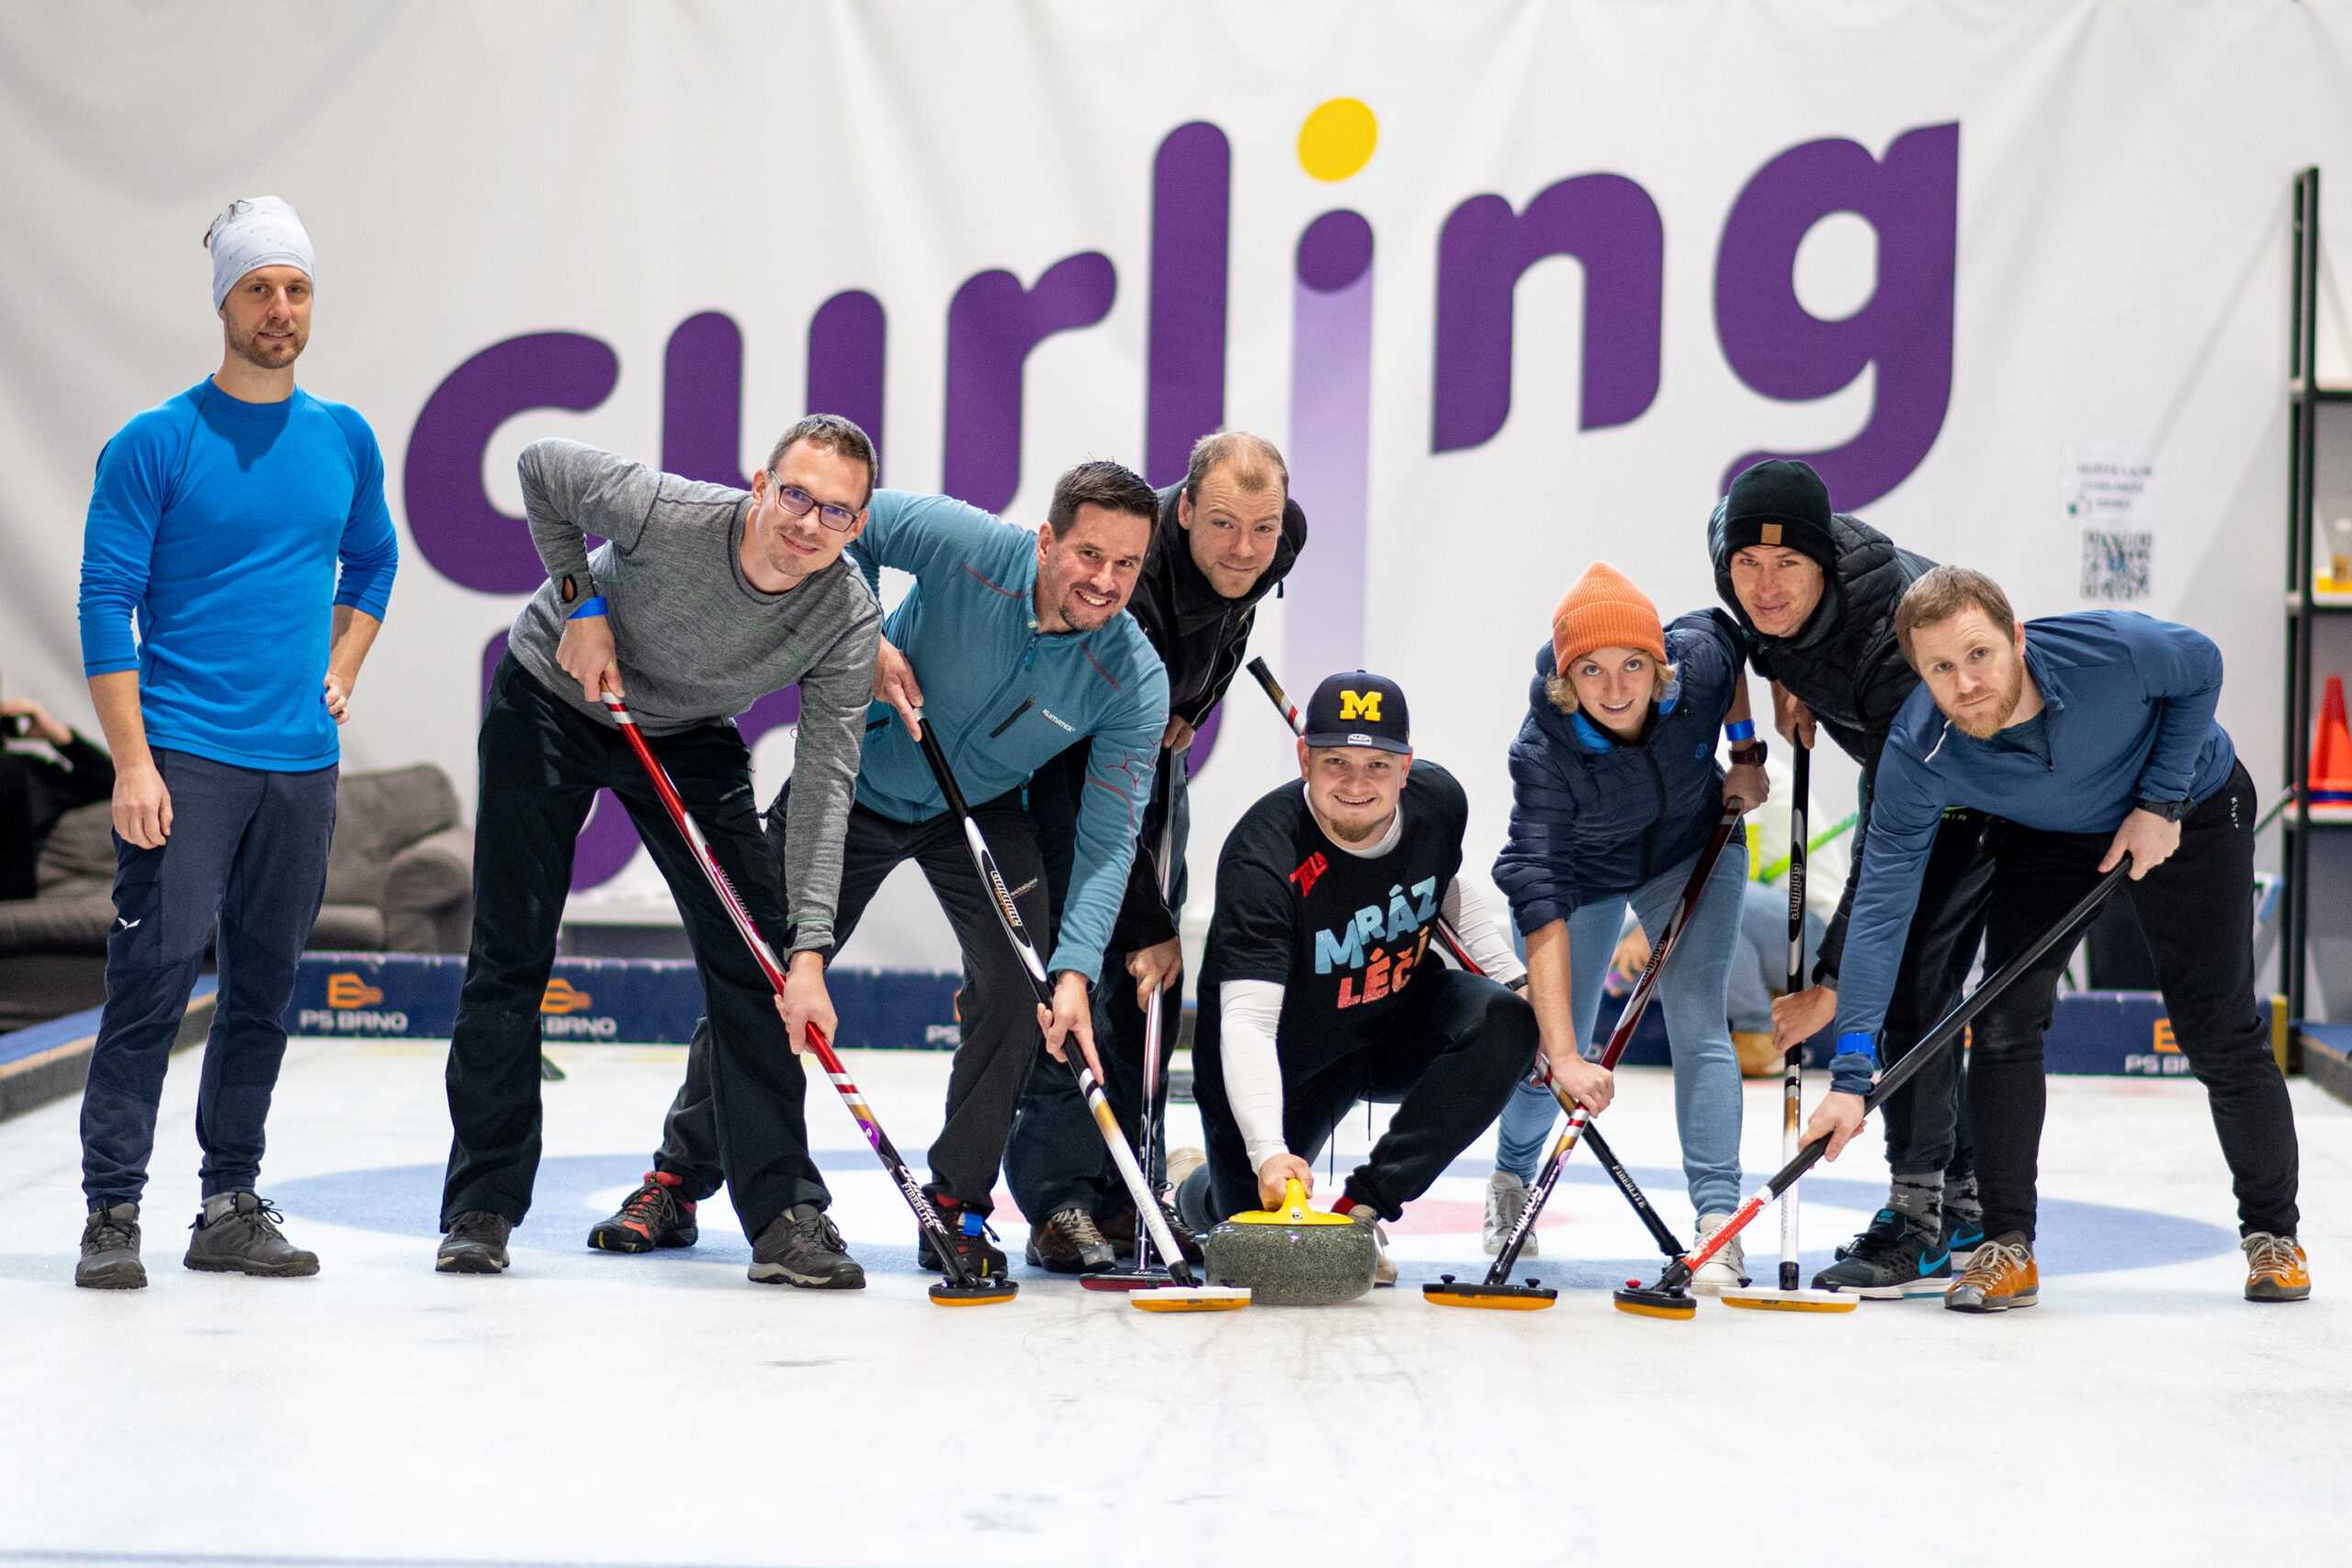 We took part in a benefit curling tournament